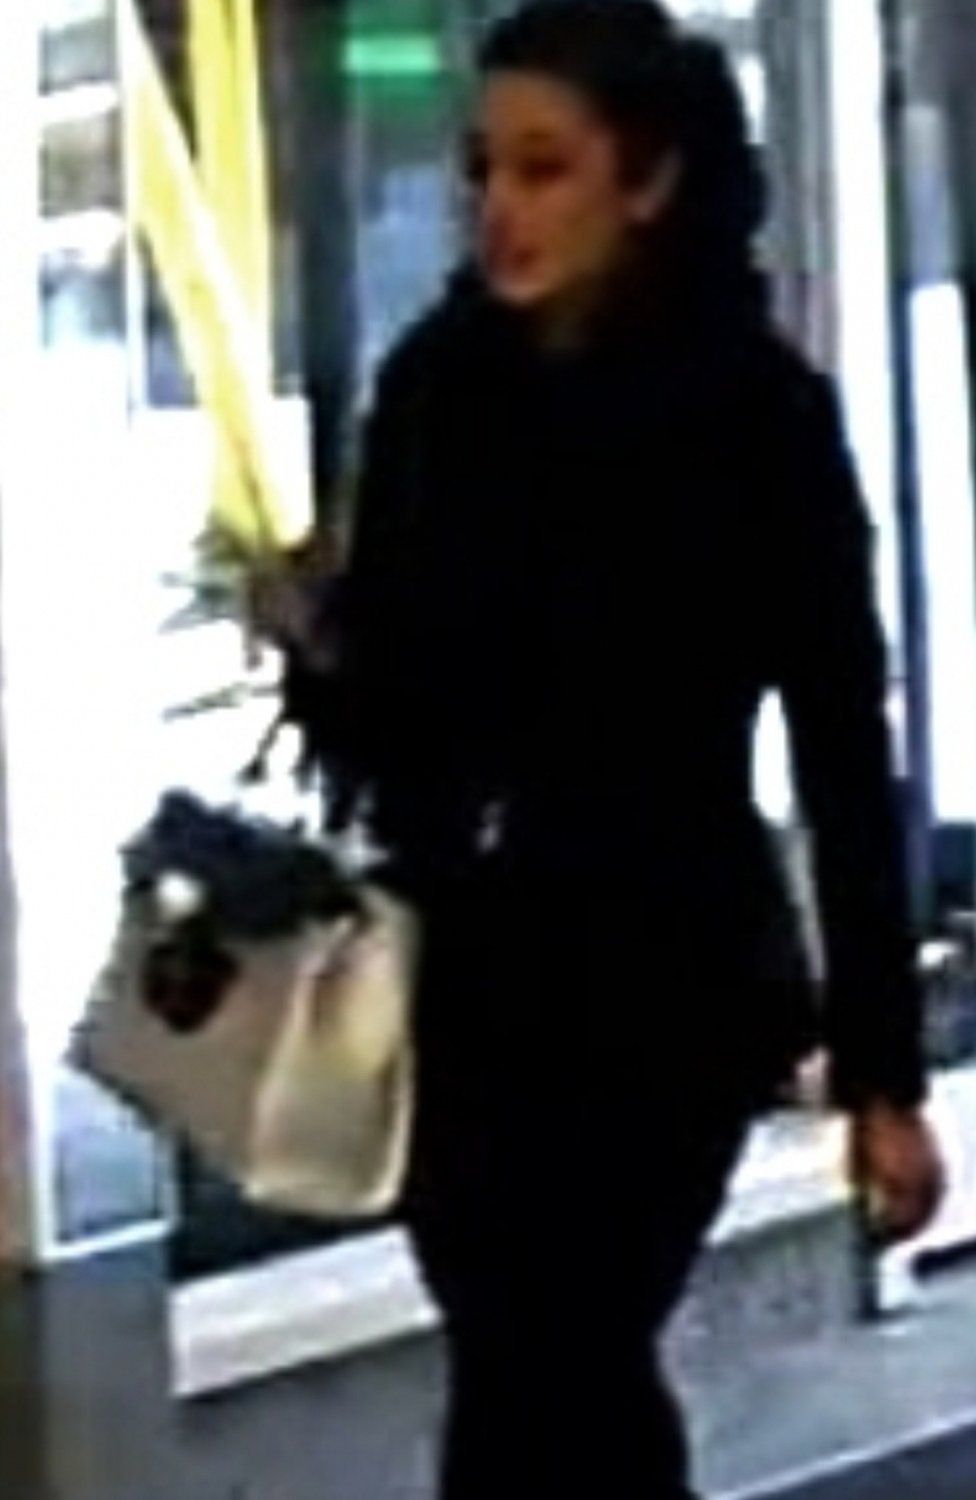 CCTV image of a woman walking with a handbag on her right arm